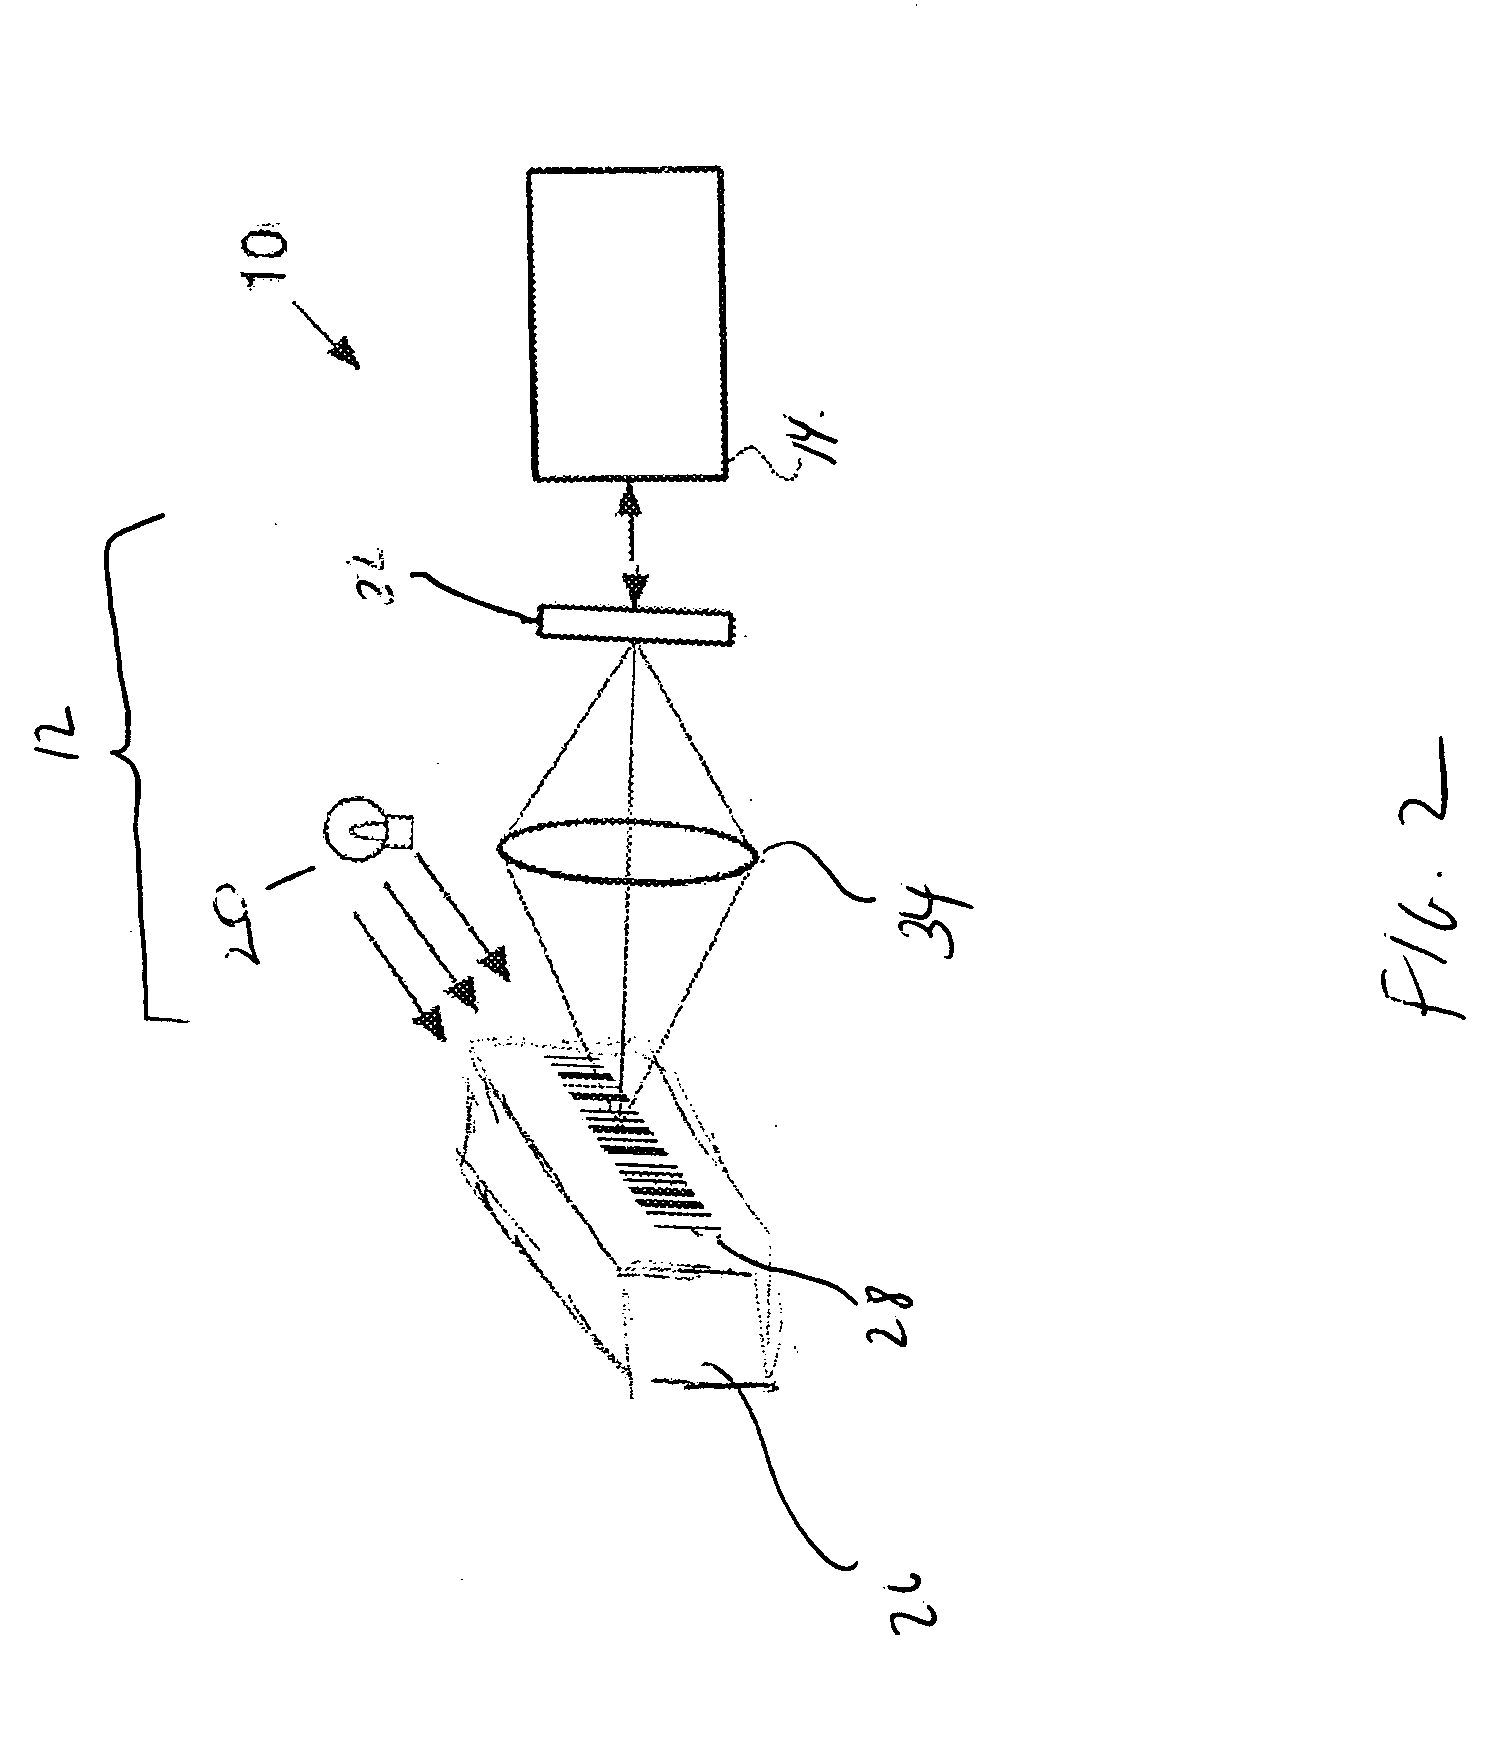 Trigger system for data reading device